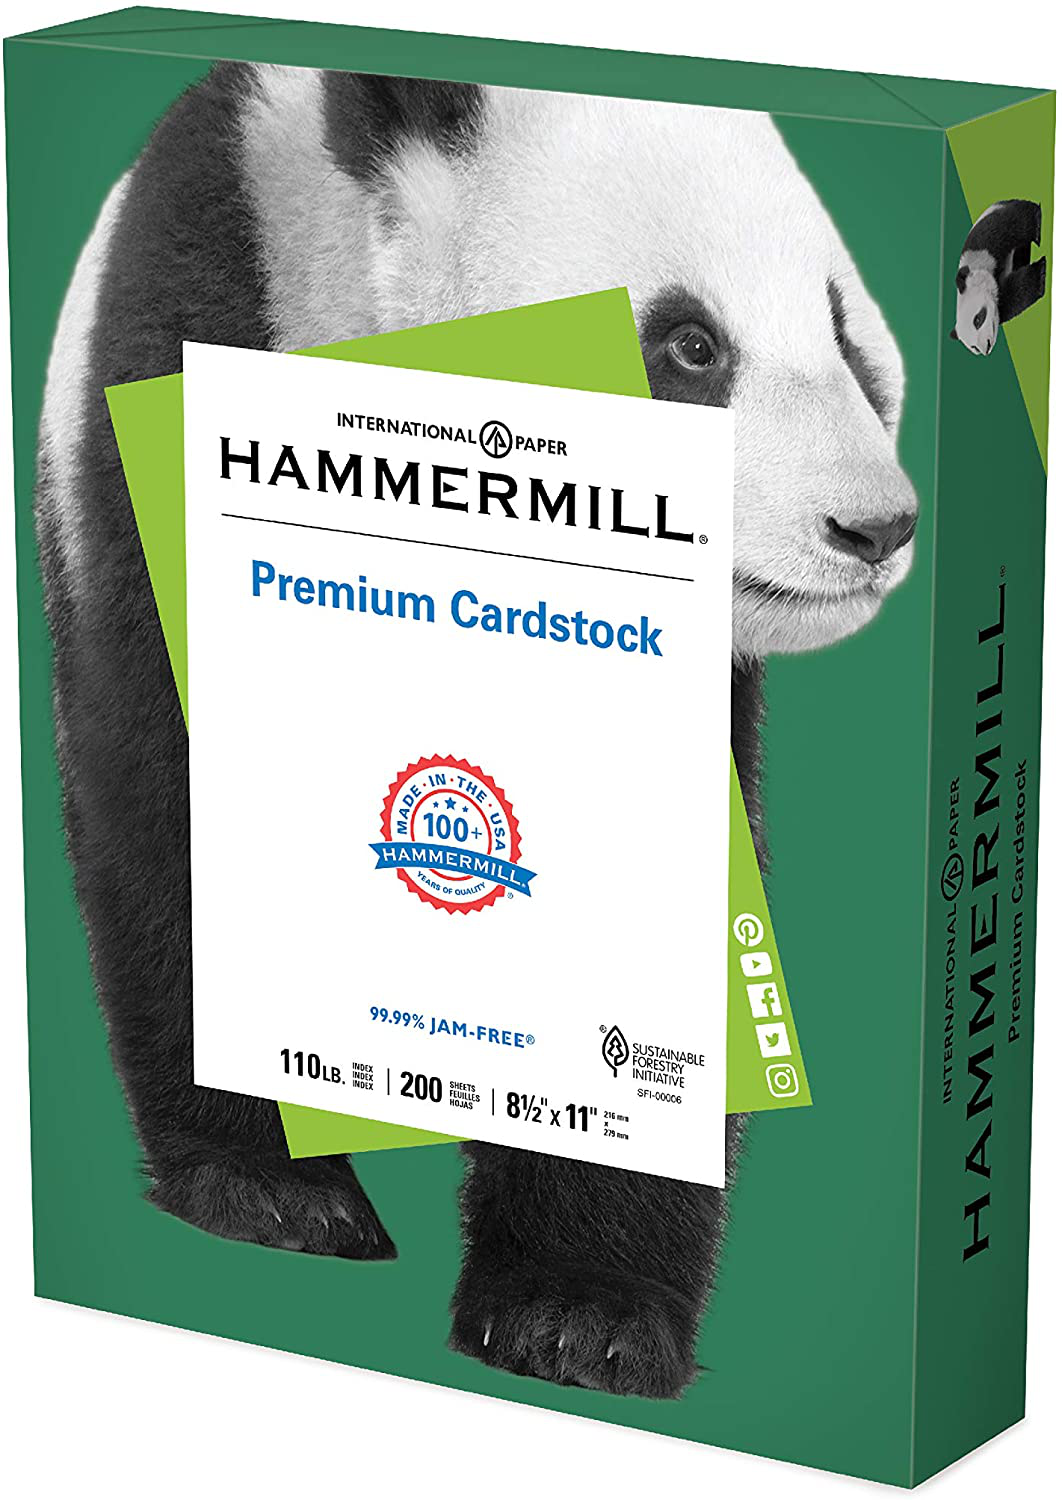 Hammermill Assorted Colors Cardstock, 110 lb, 8.5 x 11 Colored Cardstock Thick Cardstock, Made in the USA, 168390R